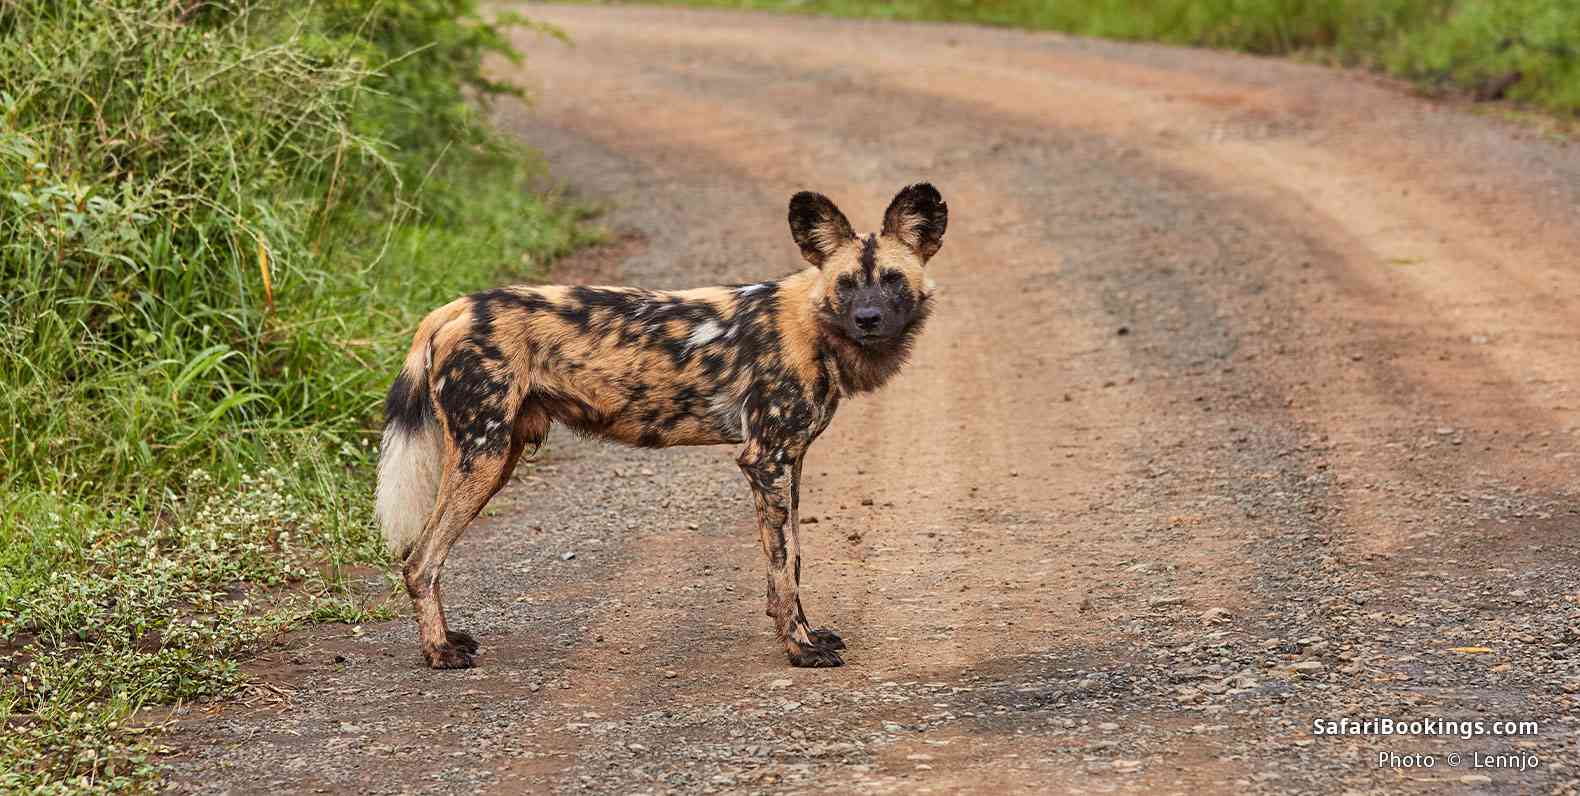 Wild dog in Hluhluwe-iMfolozi Game Reserve, South Africa